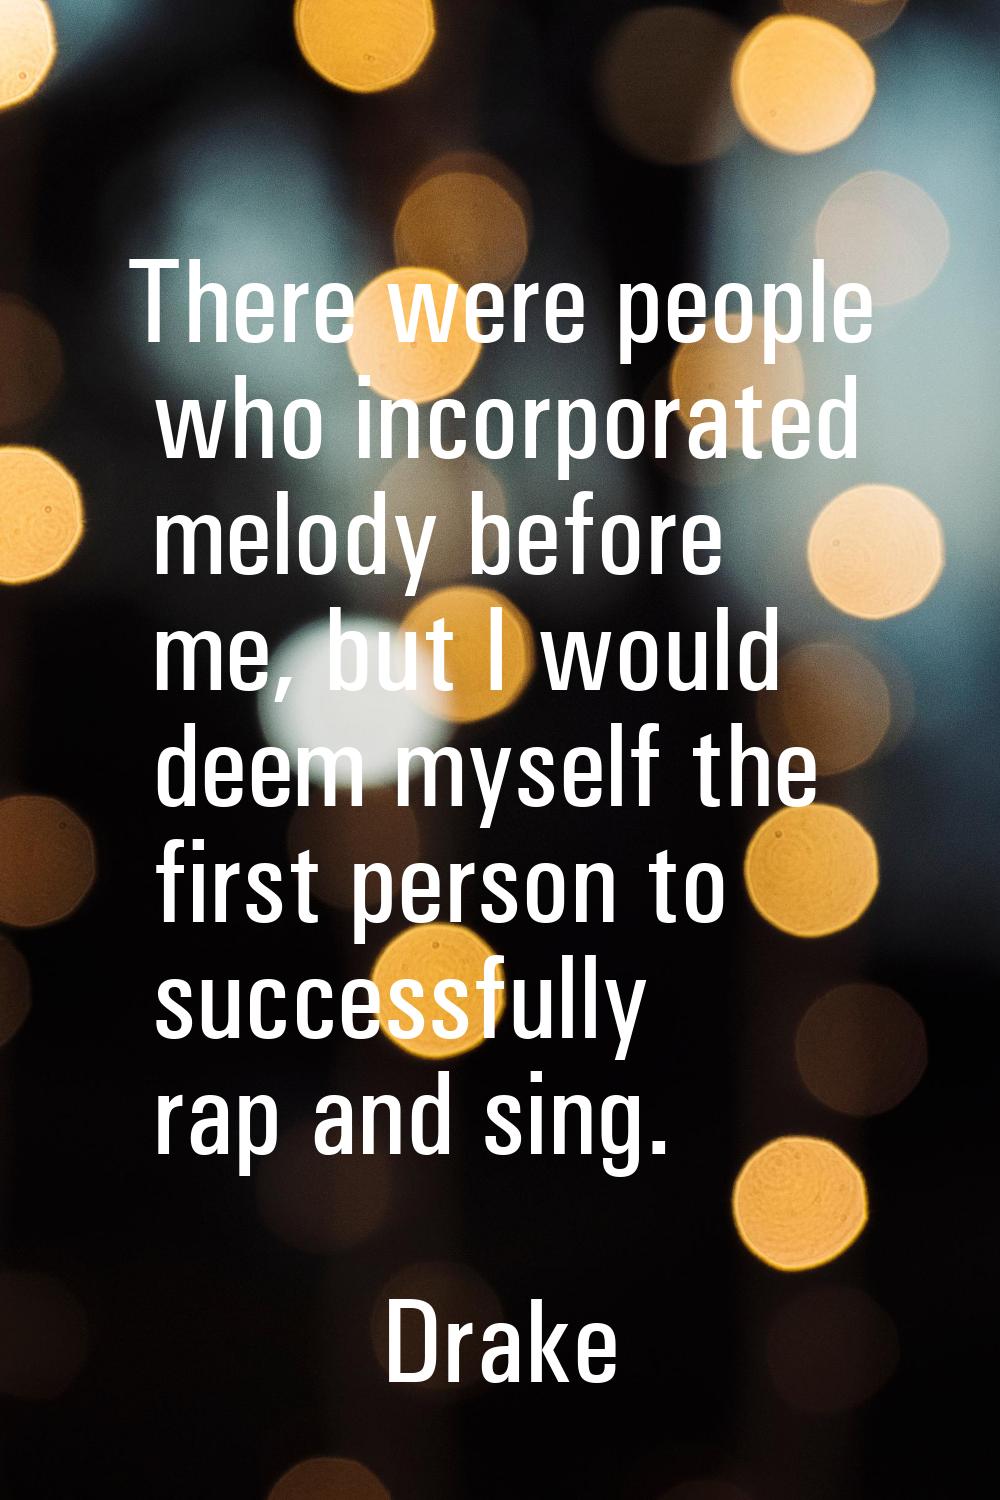 There were people who incorporated melody before me, but I would deem myself the first person to su